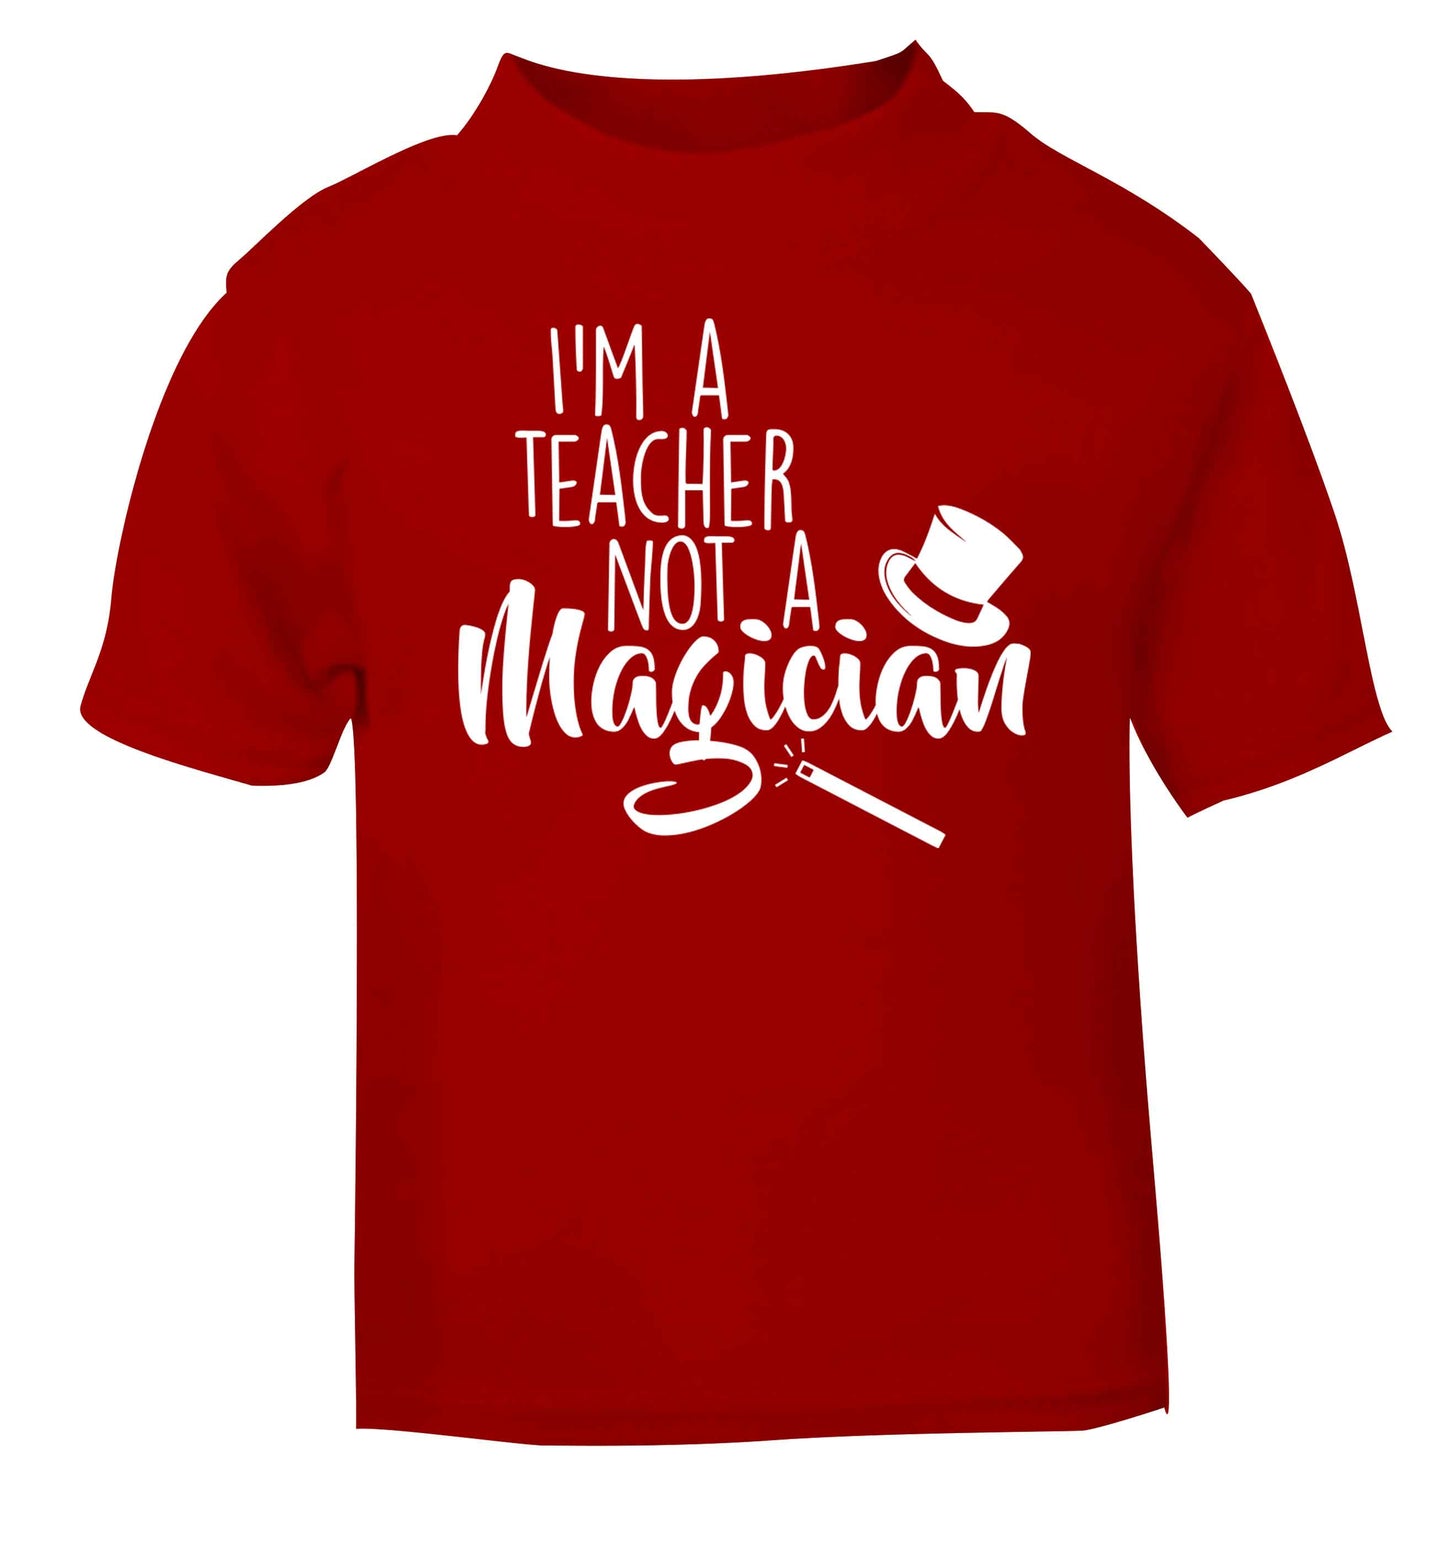 I'm a teacher not a magician red baby toddler Tshirt 2 Years